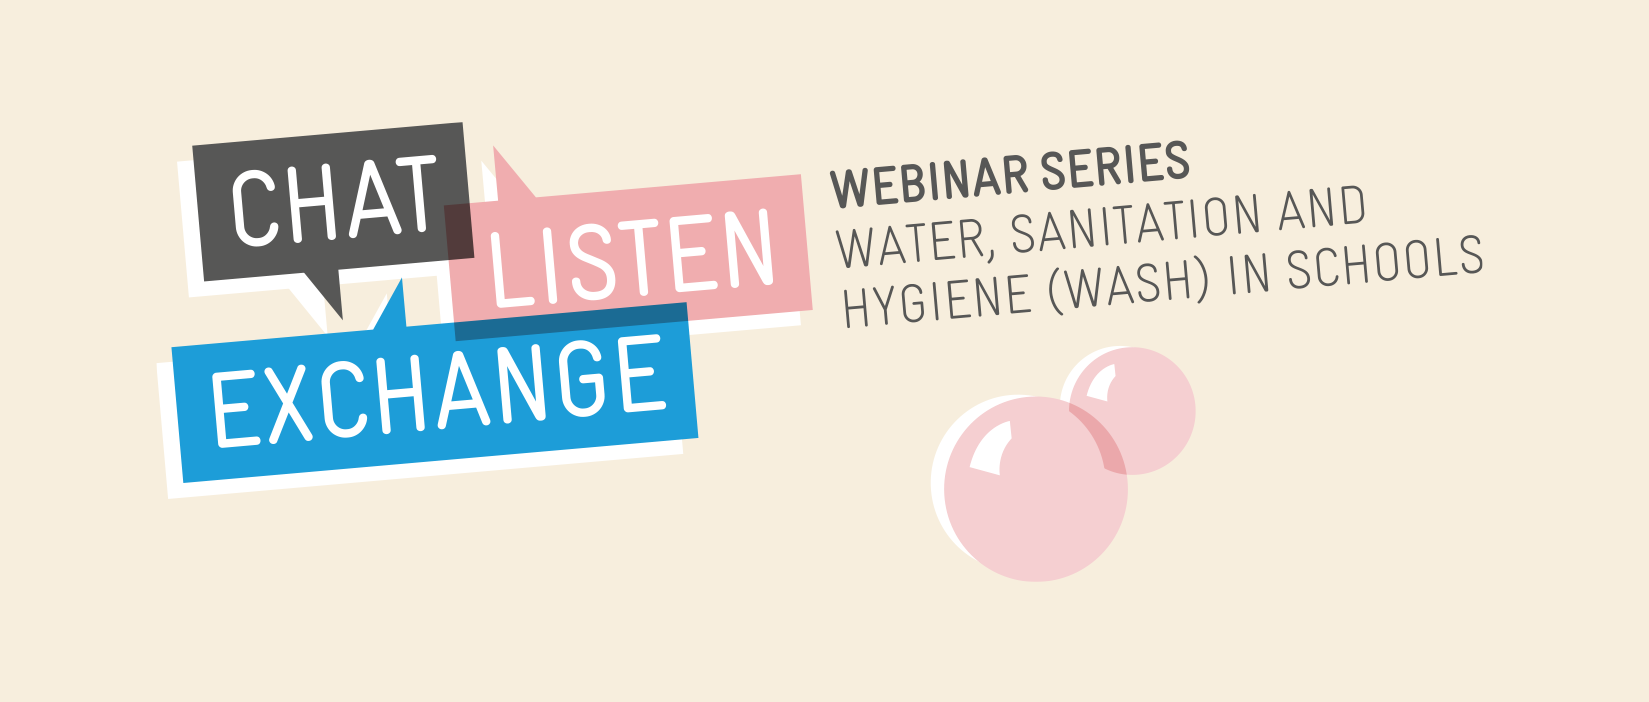 Chat, Listen, Exchange: An introduction to Climate-Resilient WASH in Schools